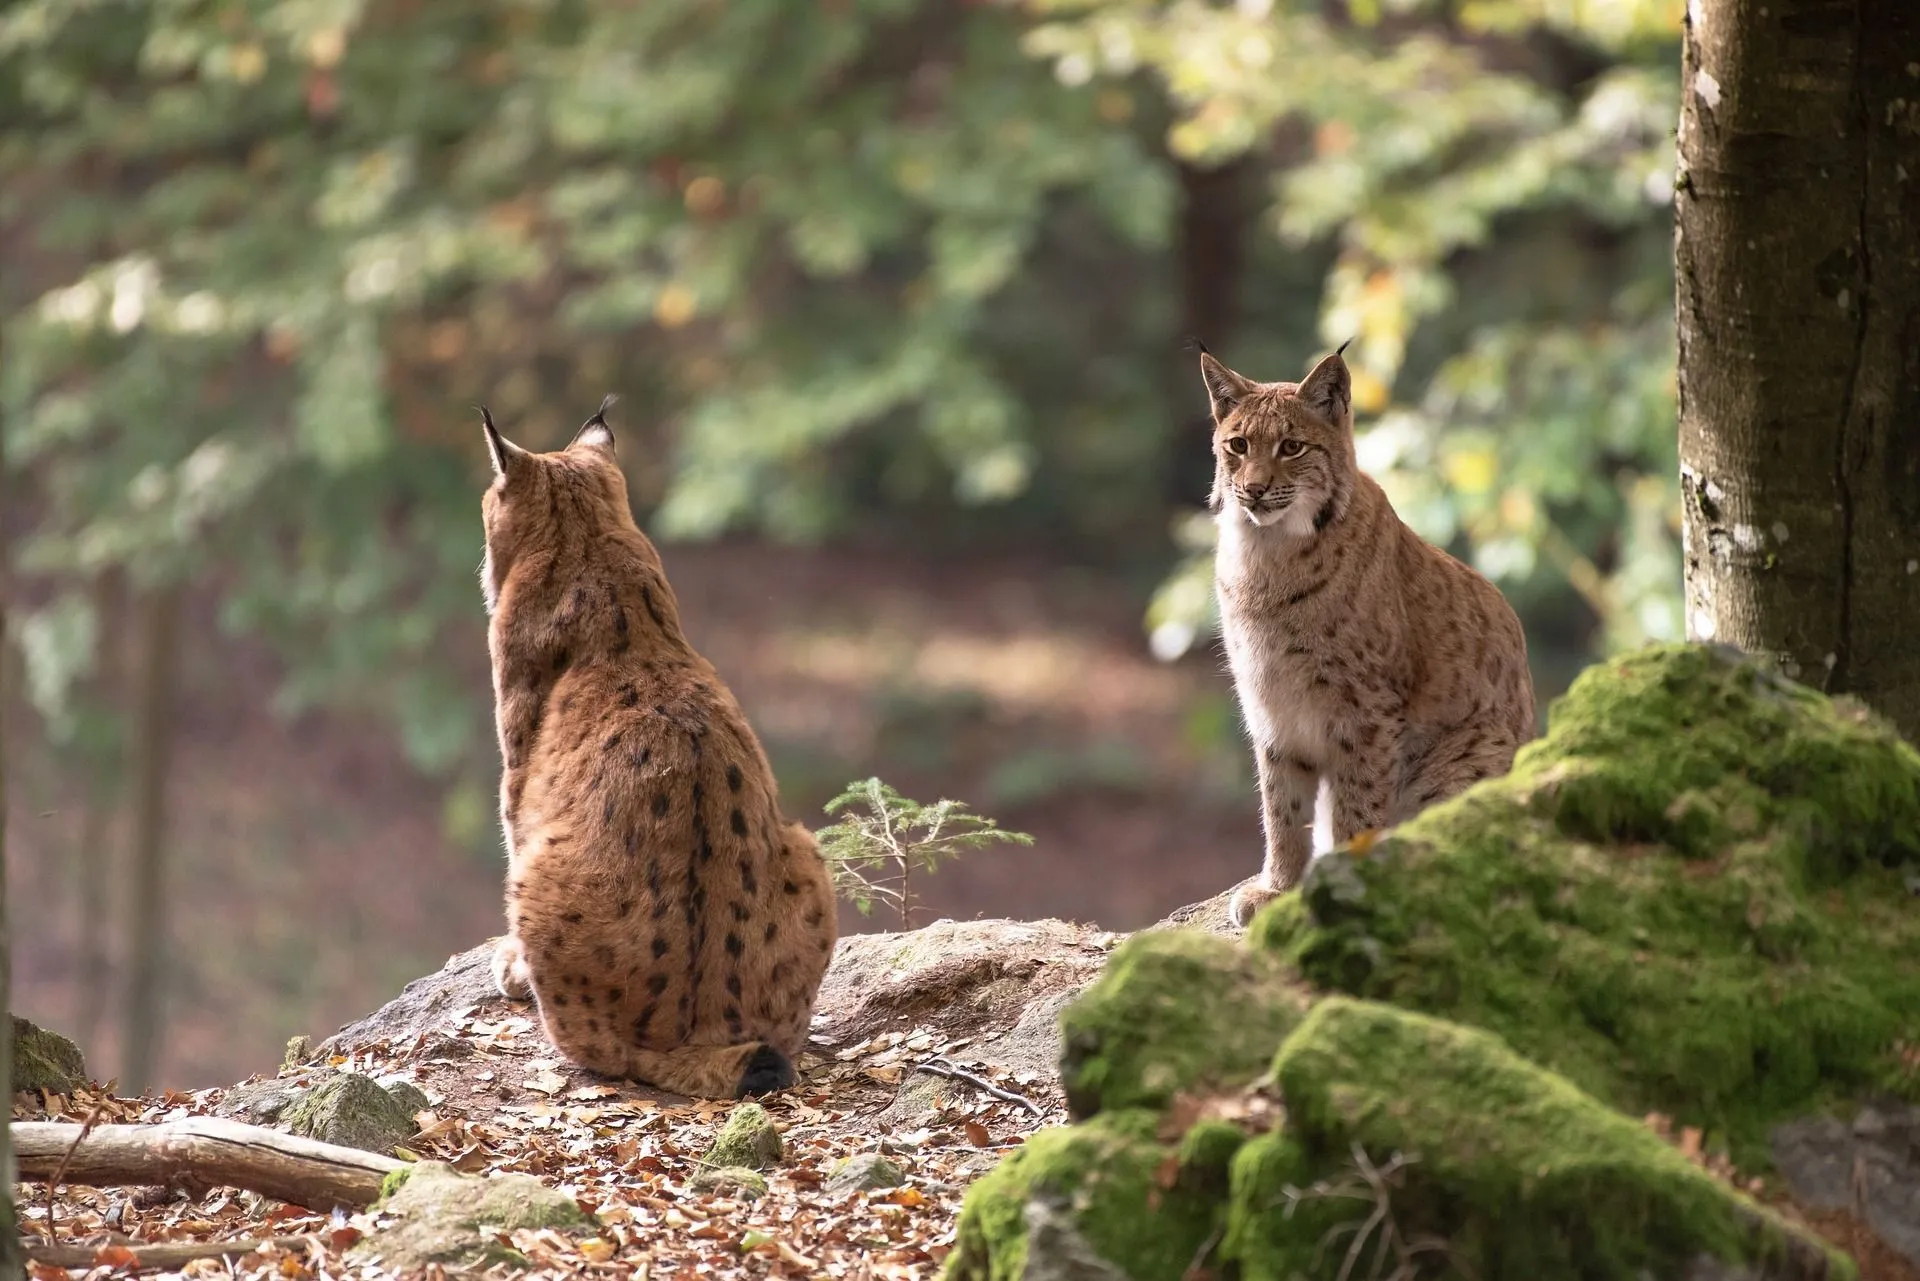 Bobcats prey on smaller animals and are generally not a threat to humans.